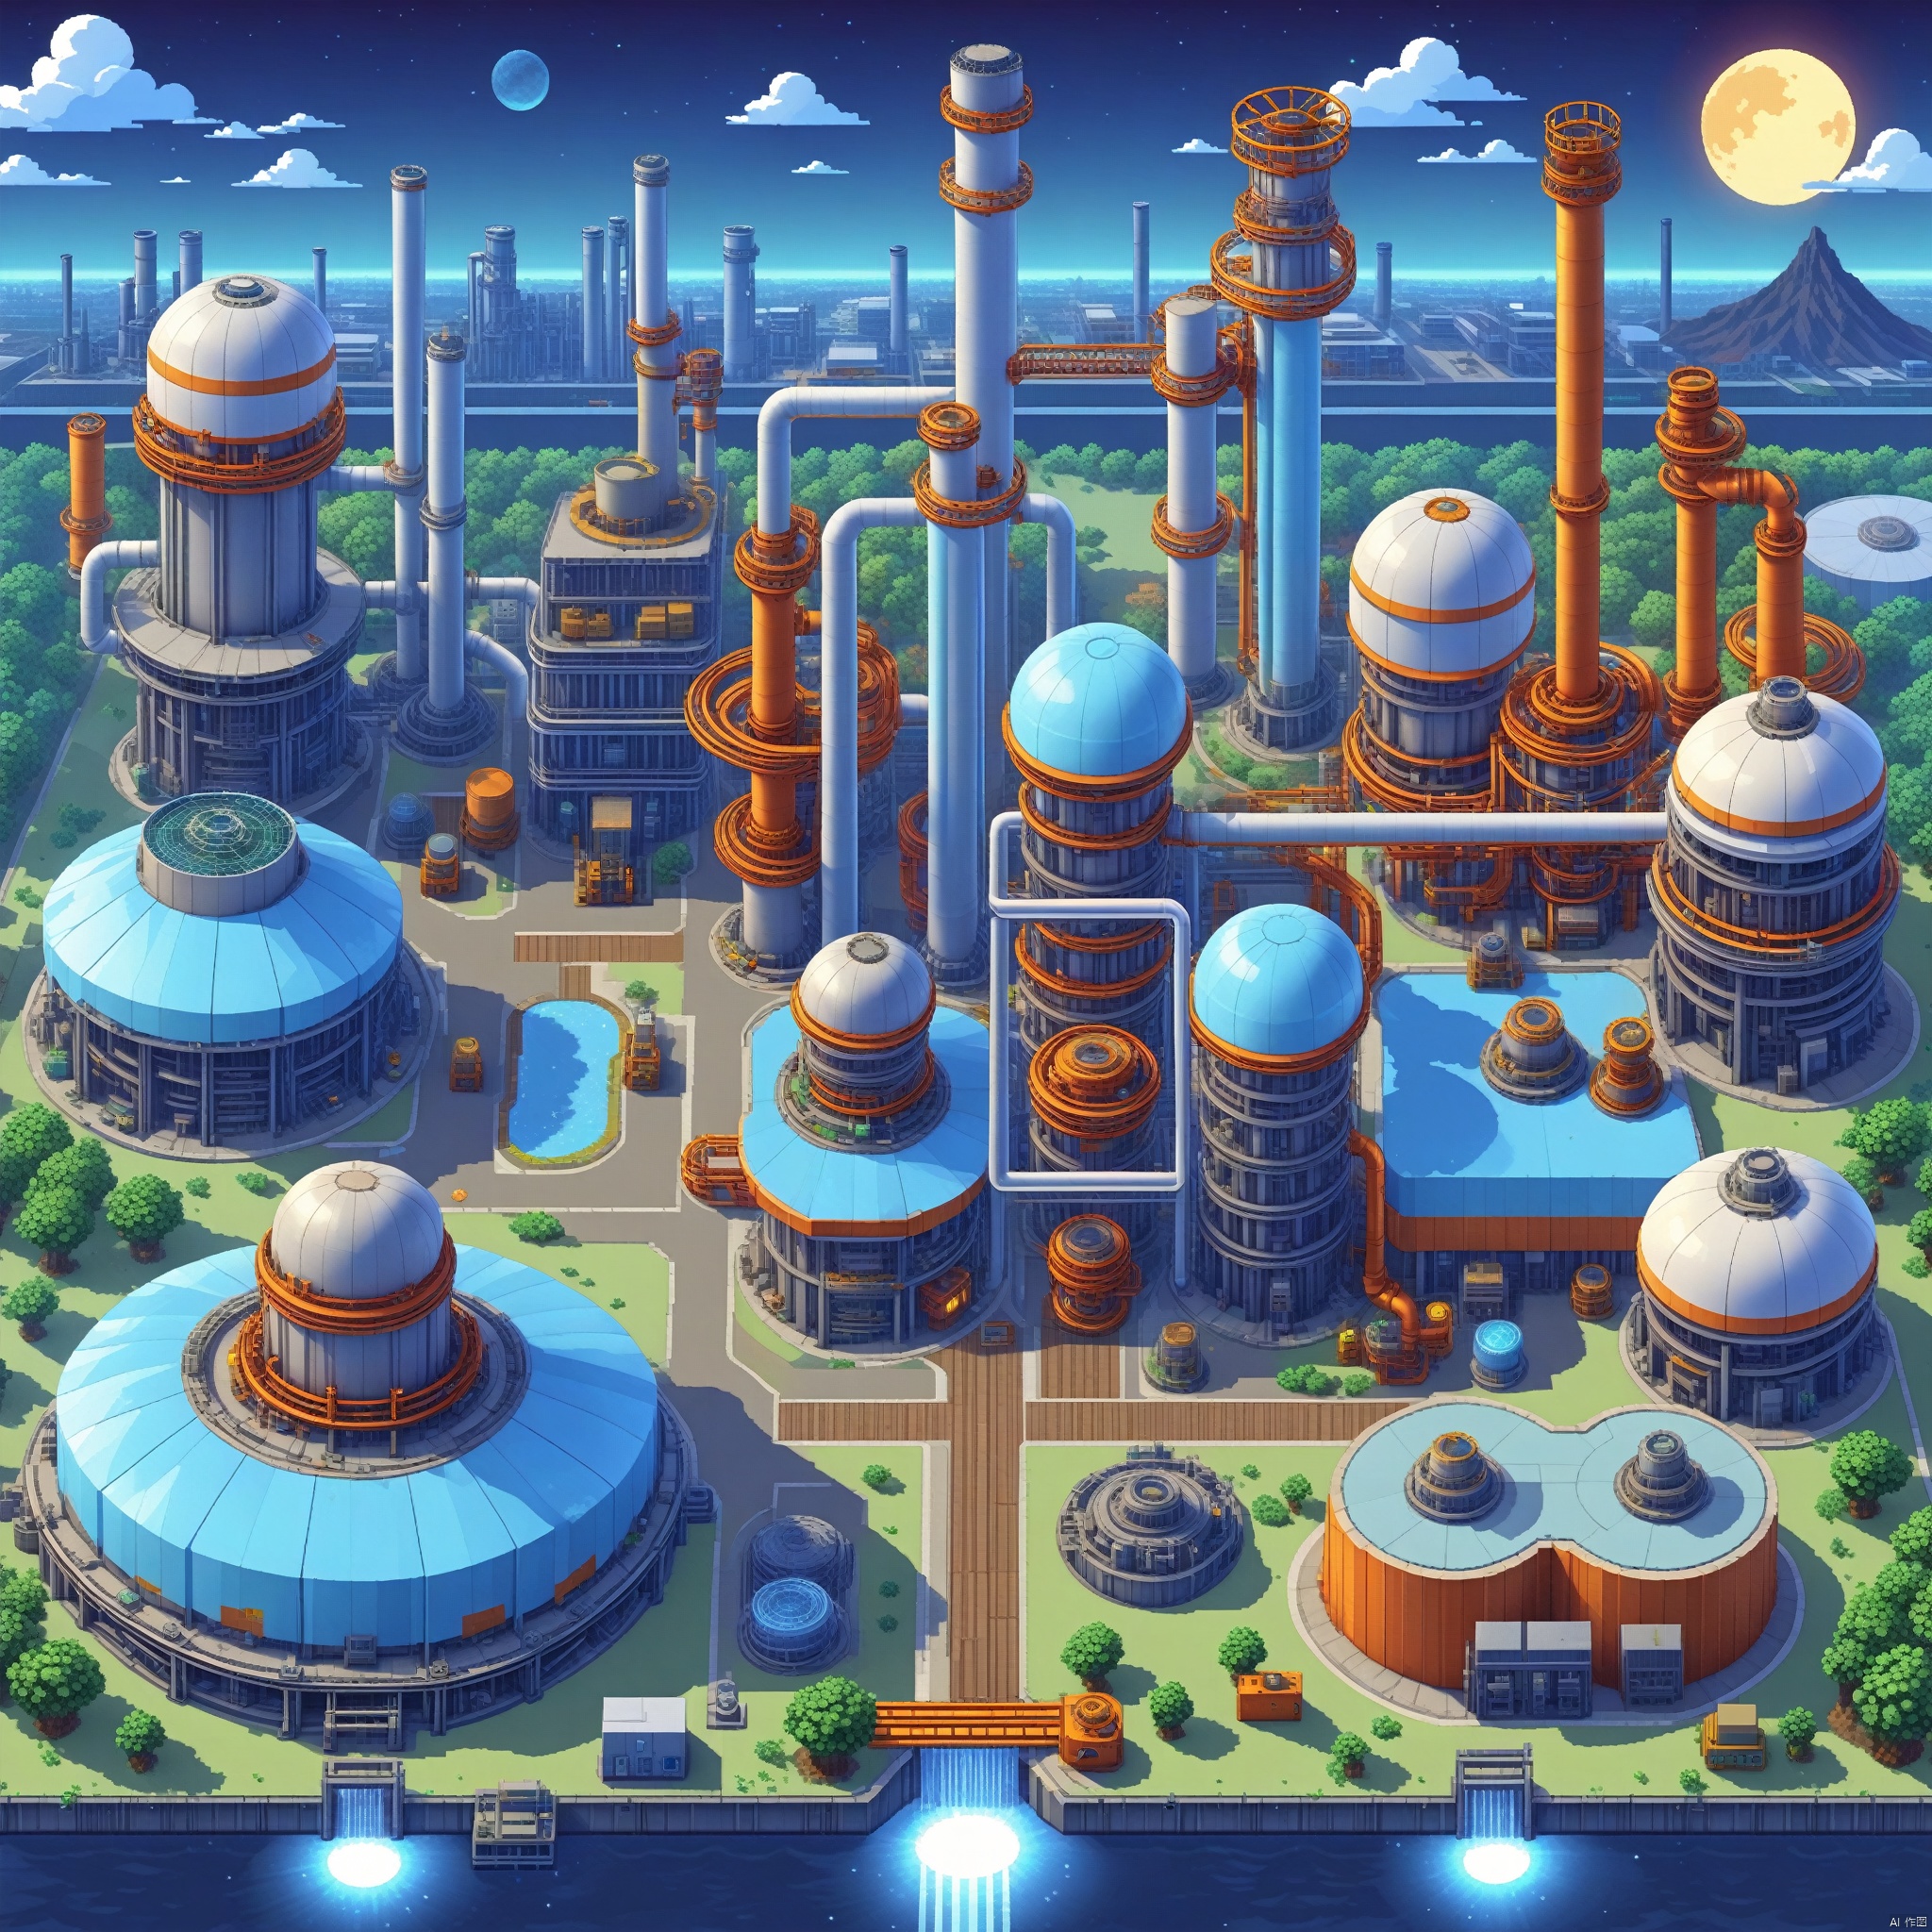 Future Industrial zone, a vibrant one with all kinds of magical plants glowing in the moonlight, with a modern industrial park in the background. , Illustrated, 3d, Cartoon, High resolution, High quality, Detailed, Masterpiece, hdr, Sharp, [Pixel art style], [Abebe style], amazing, beautiful, amazing, brilliant, incredible,